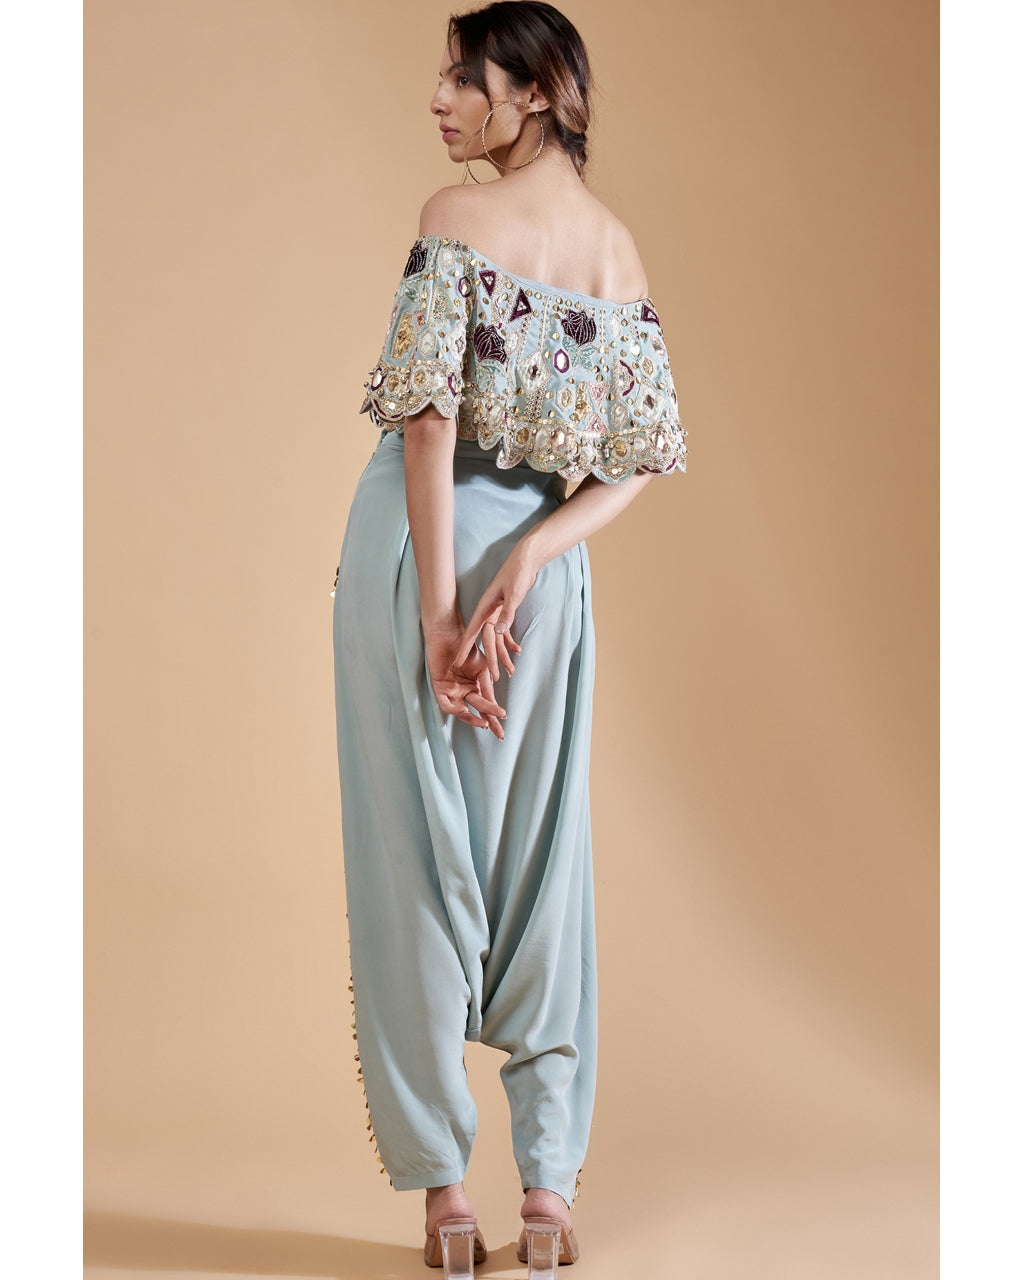 Powder Blue Top With Low Crotch Pant